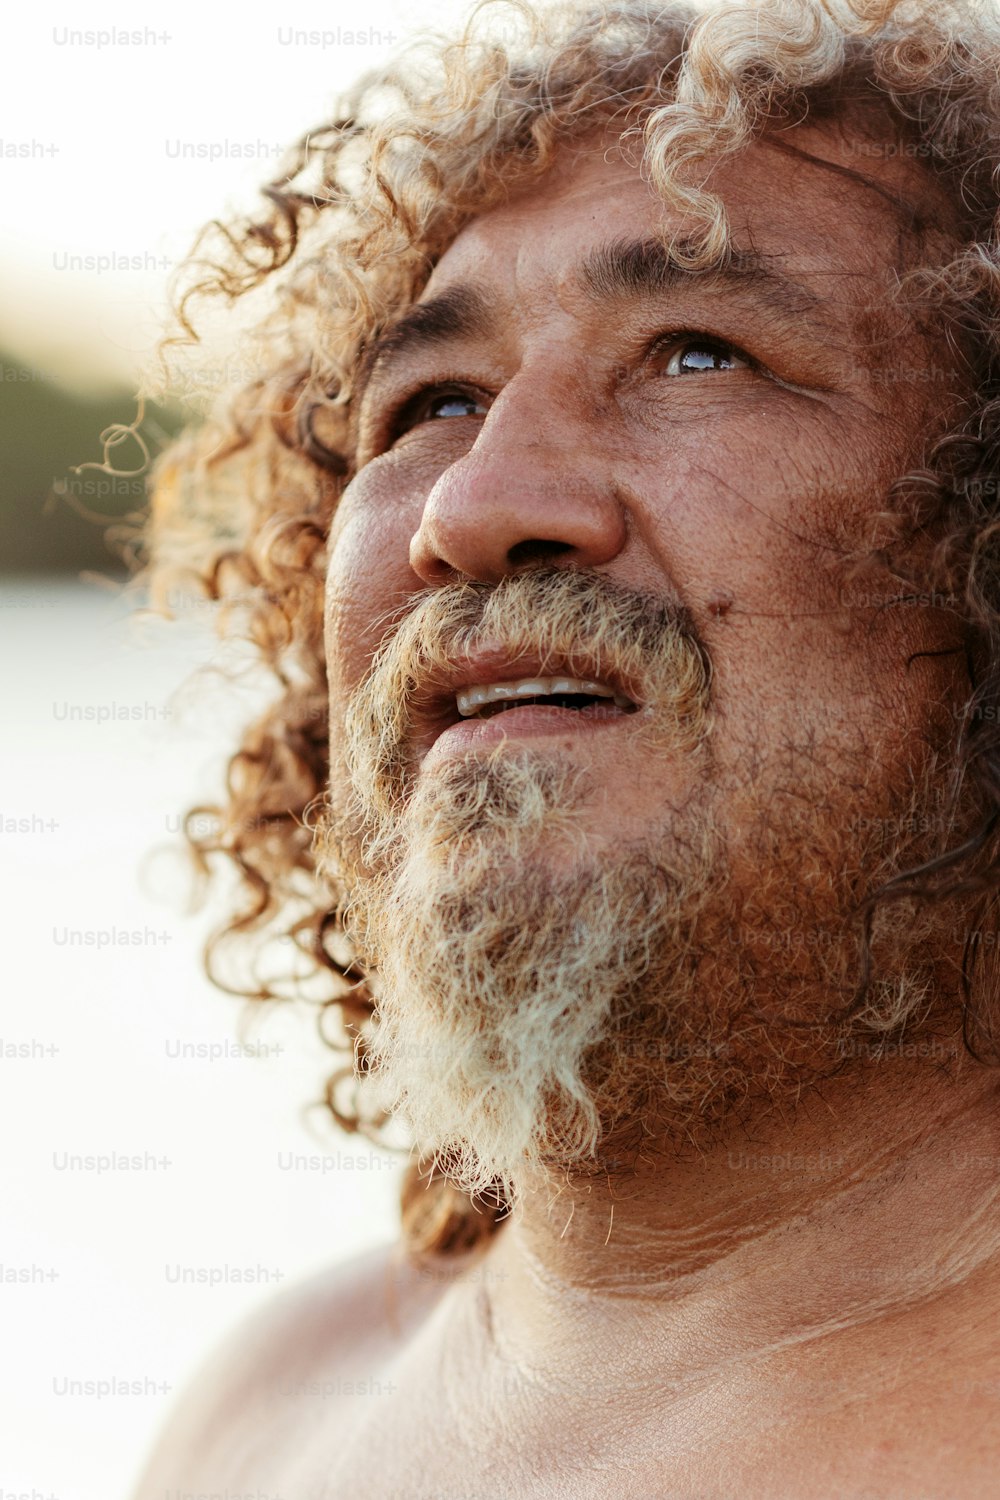 a close up of a man with curly hair and beard